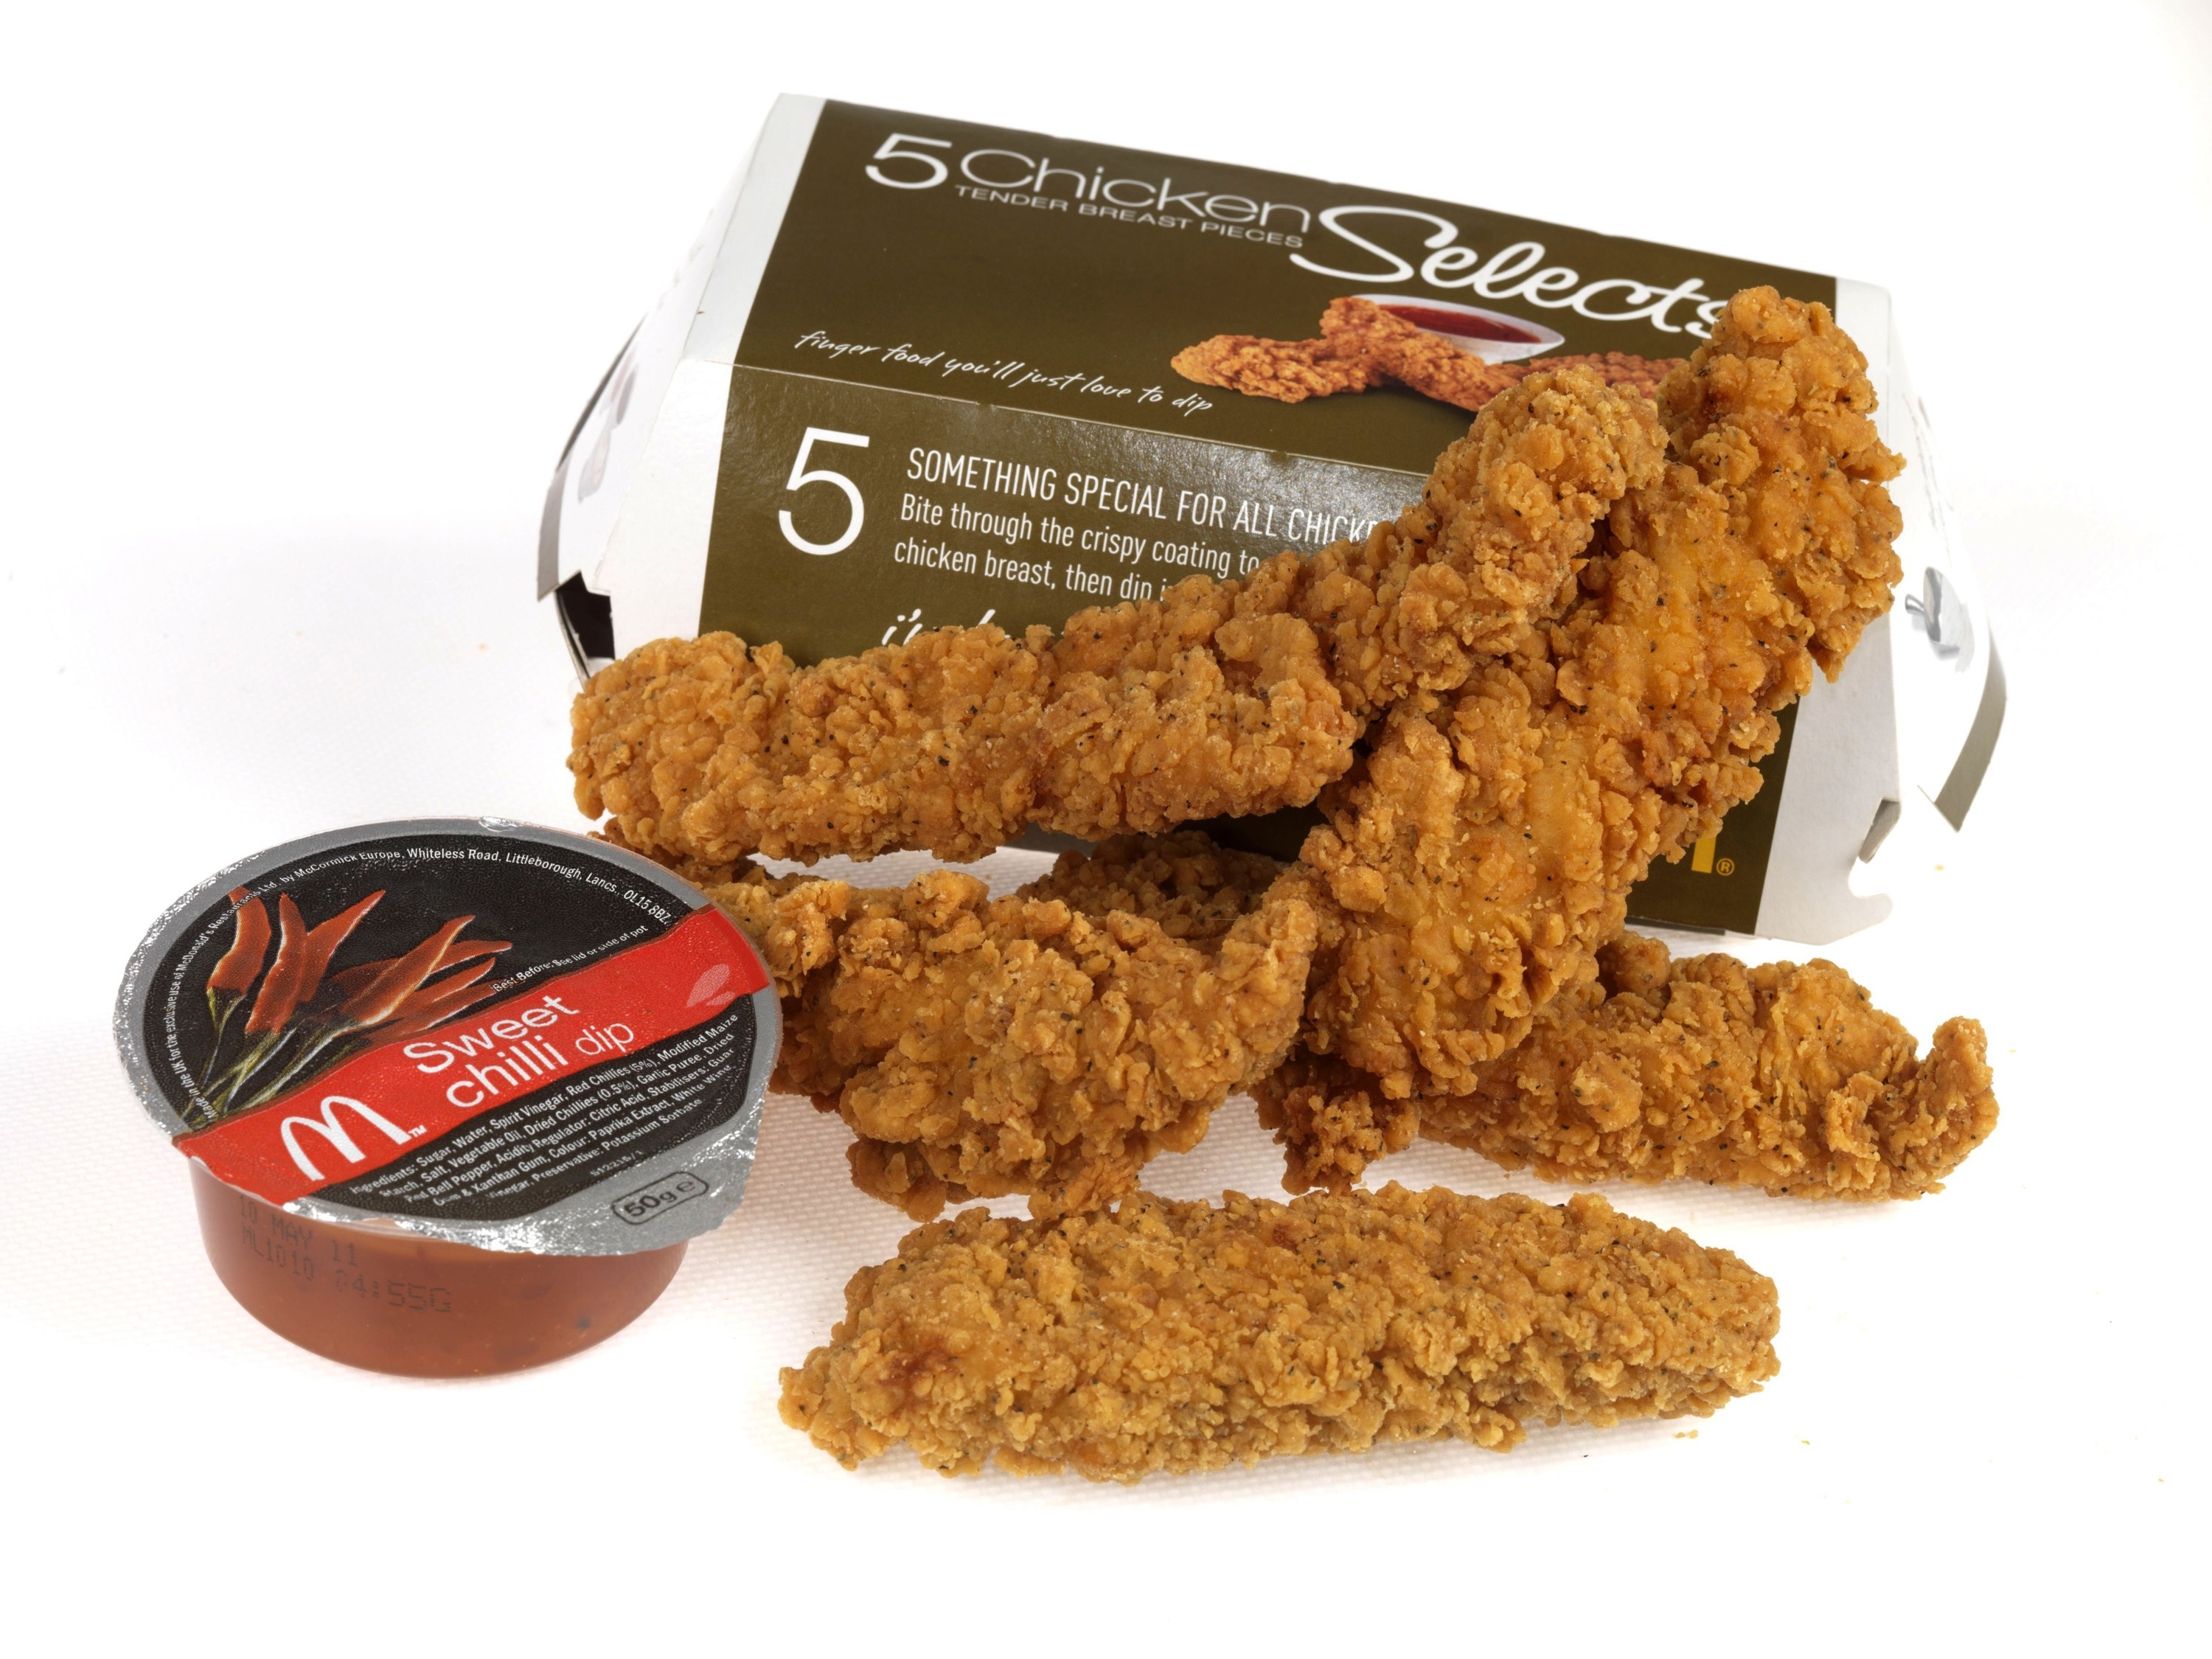 A box of 5 Chicken Selects with Sweet Chili dip